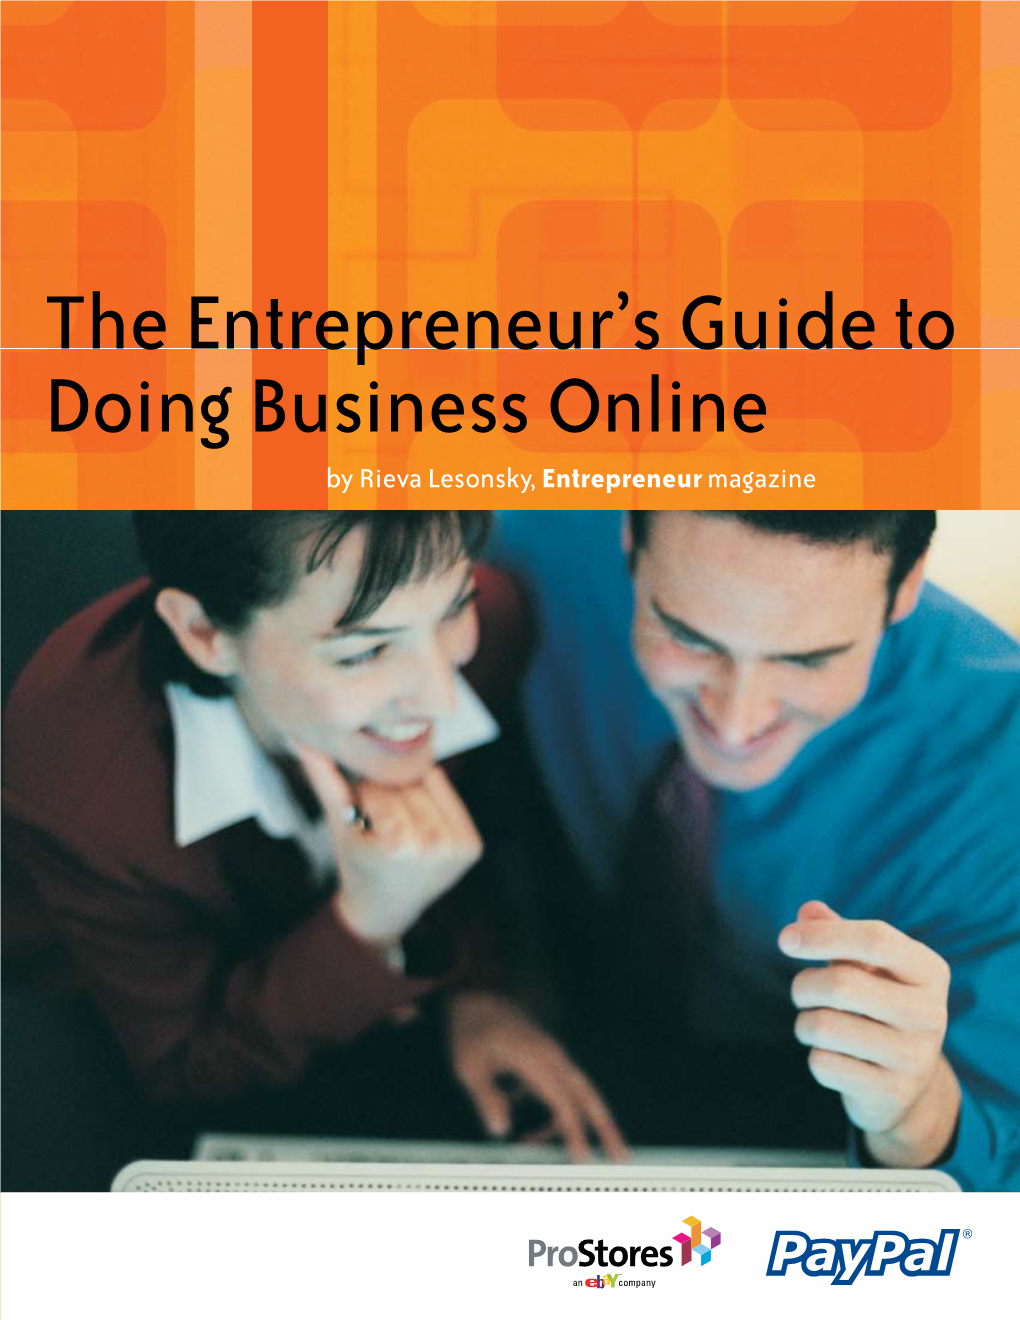 The Entrepreneur's Guide to Doing Business Online